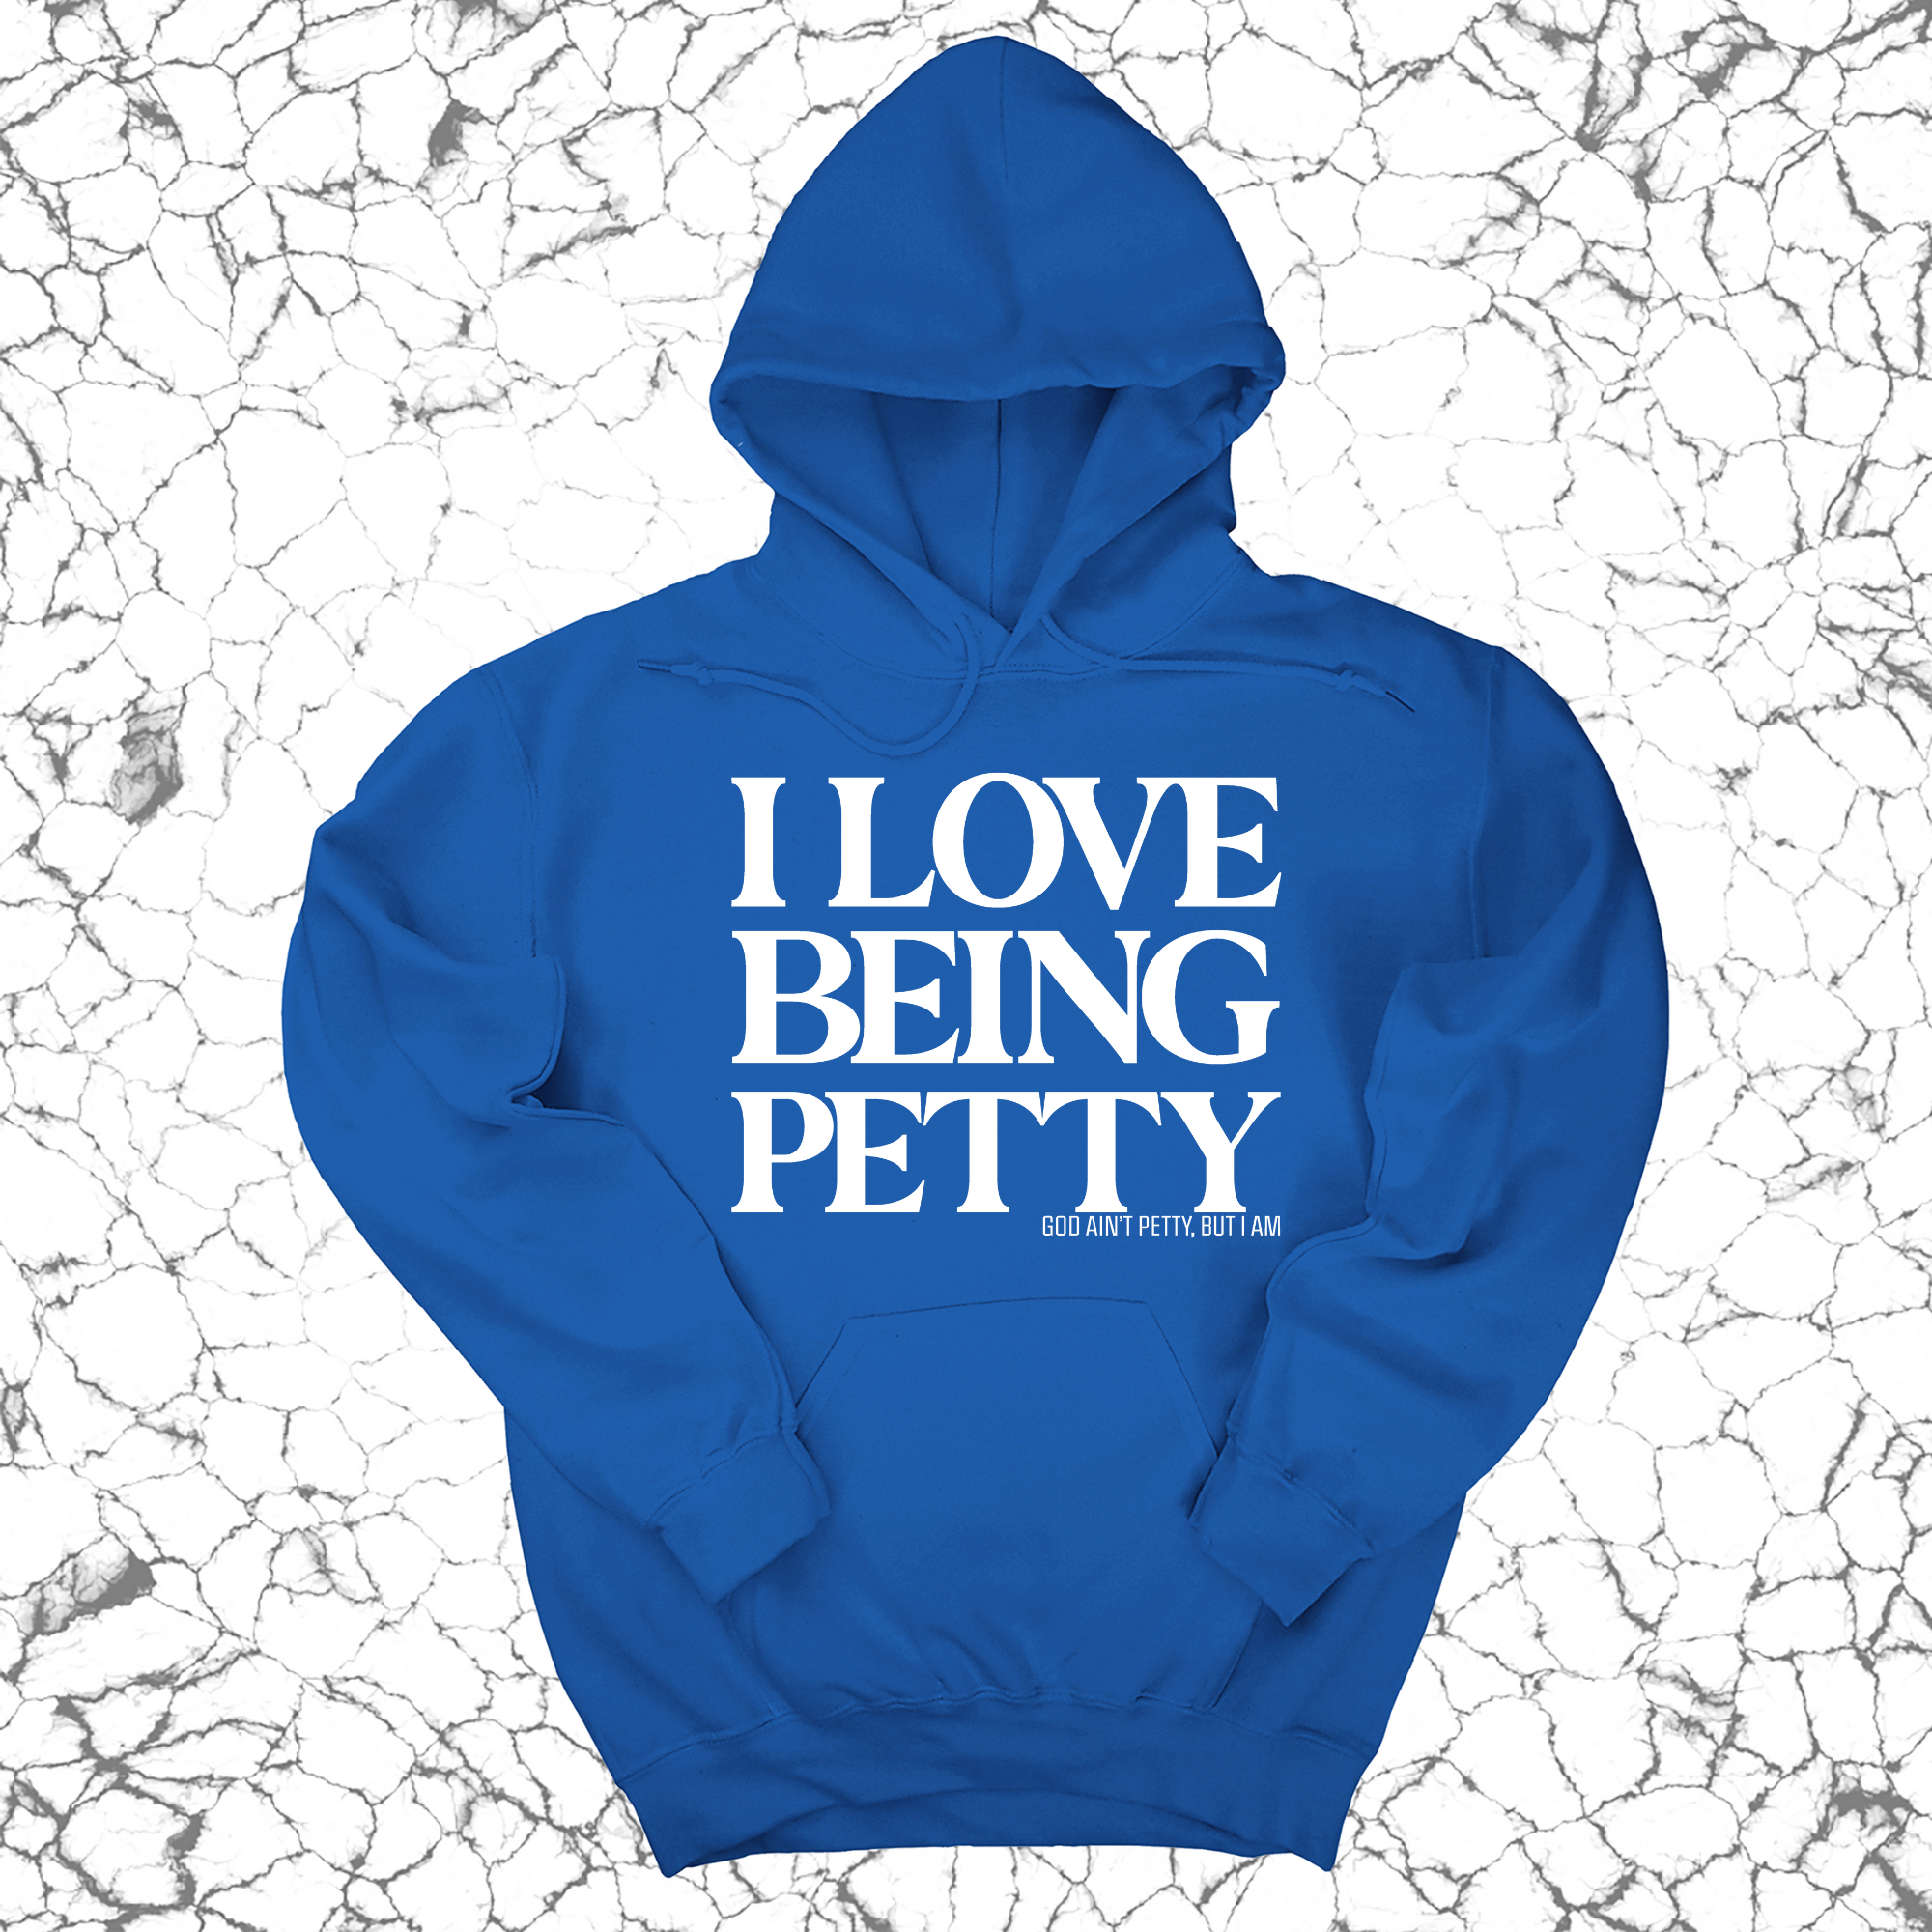 I Love Being Petty Unisex Hoodie-Hoodie-The Original God Ain't Petty But I Am